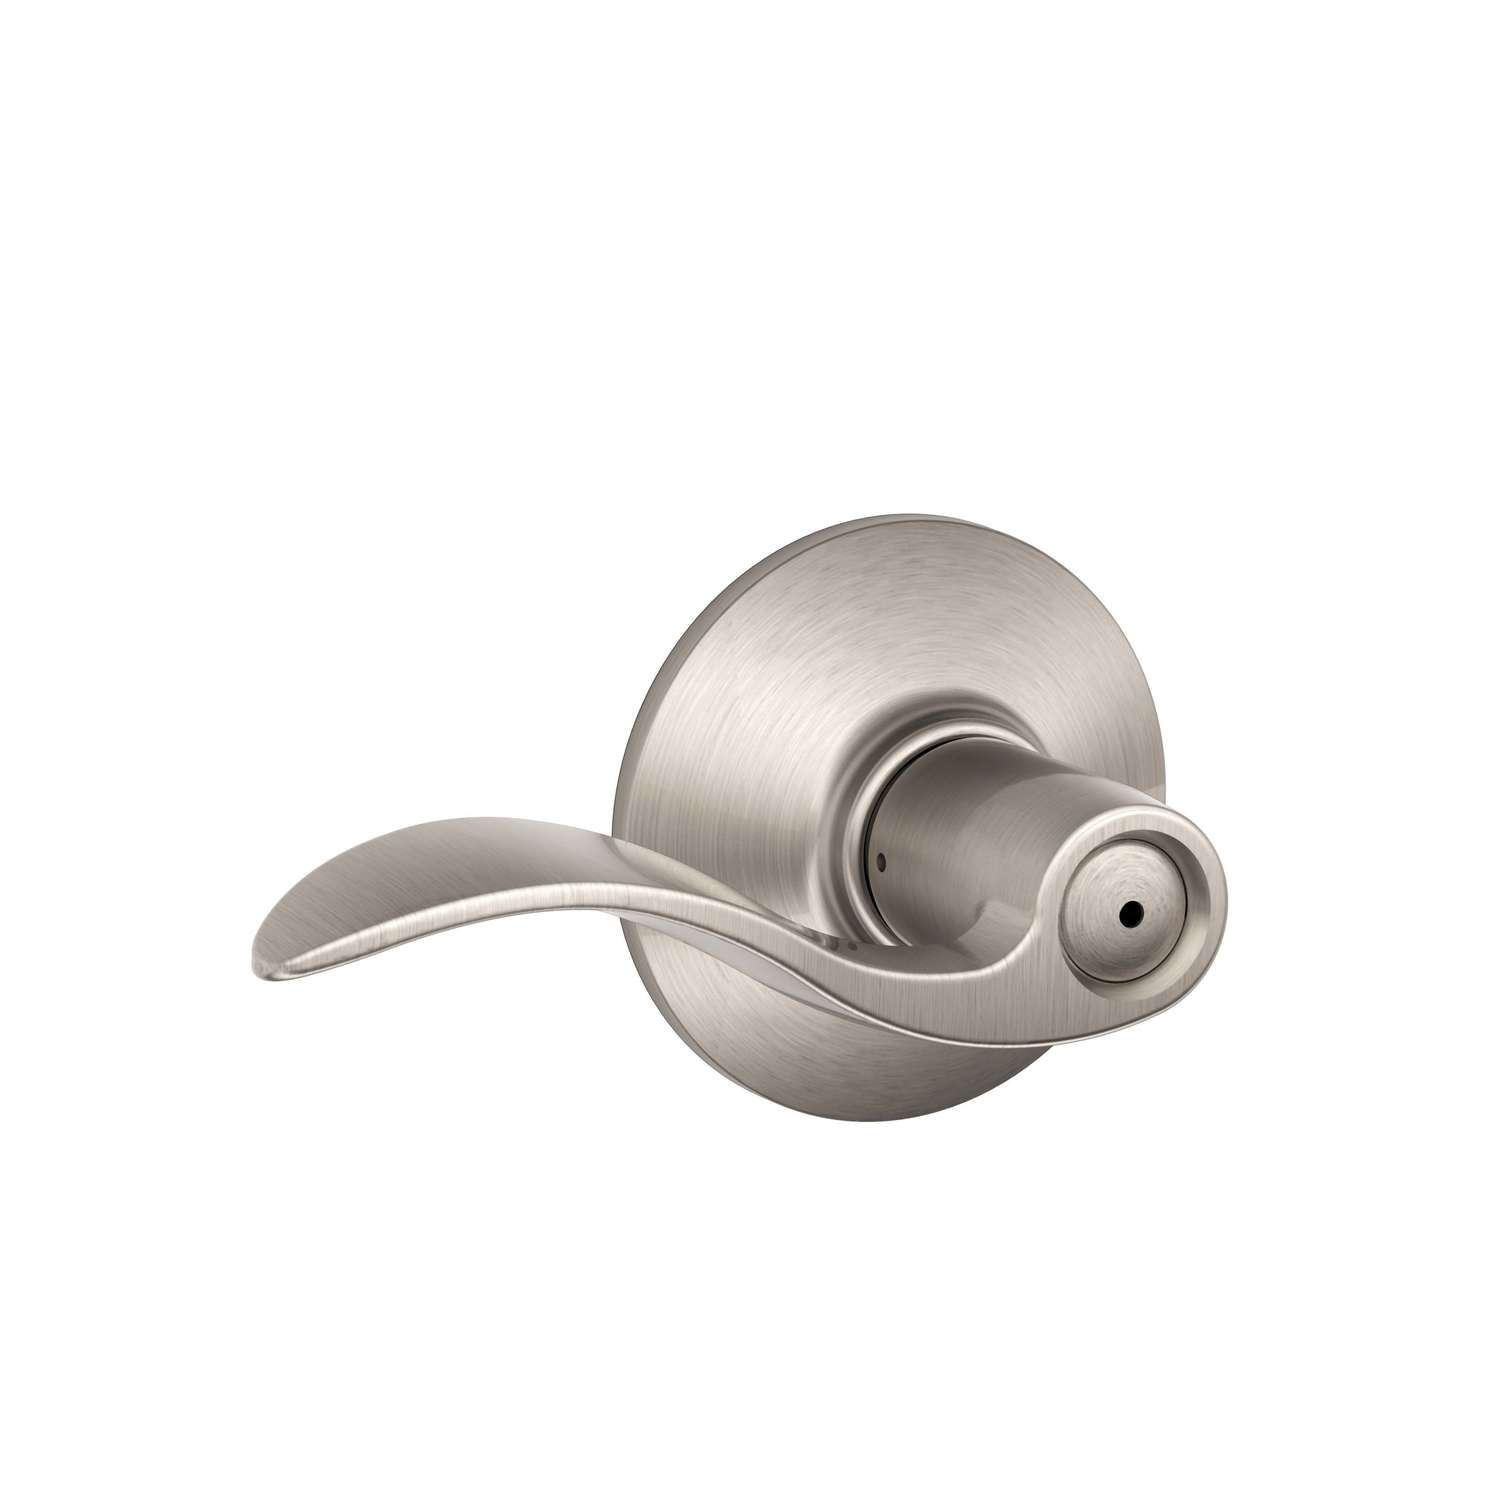 Privacy Levers and Knobs - Ace Hardware